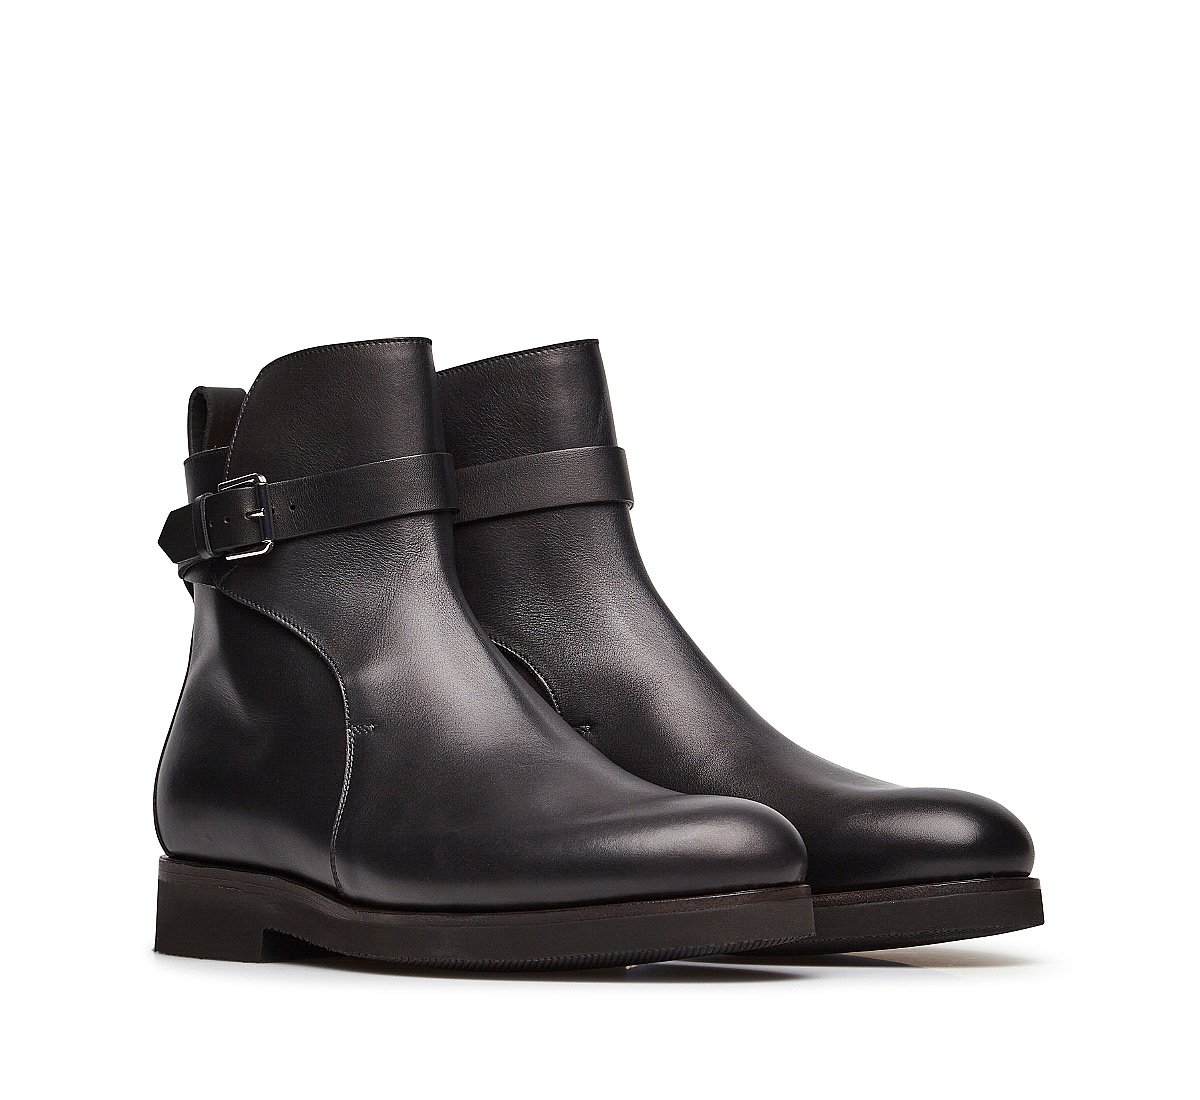 Online exclusive - Calfskin ankle boots